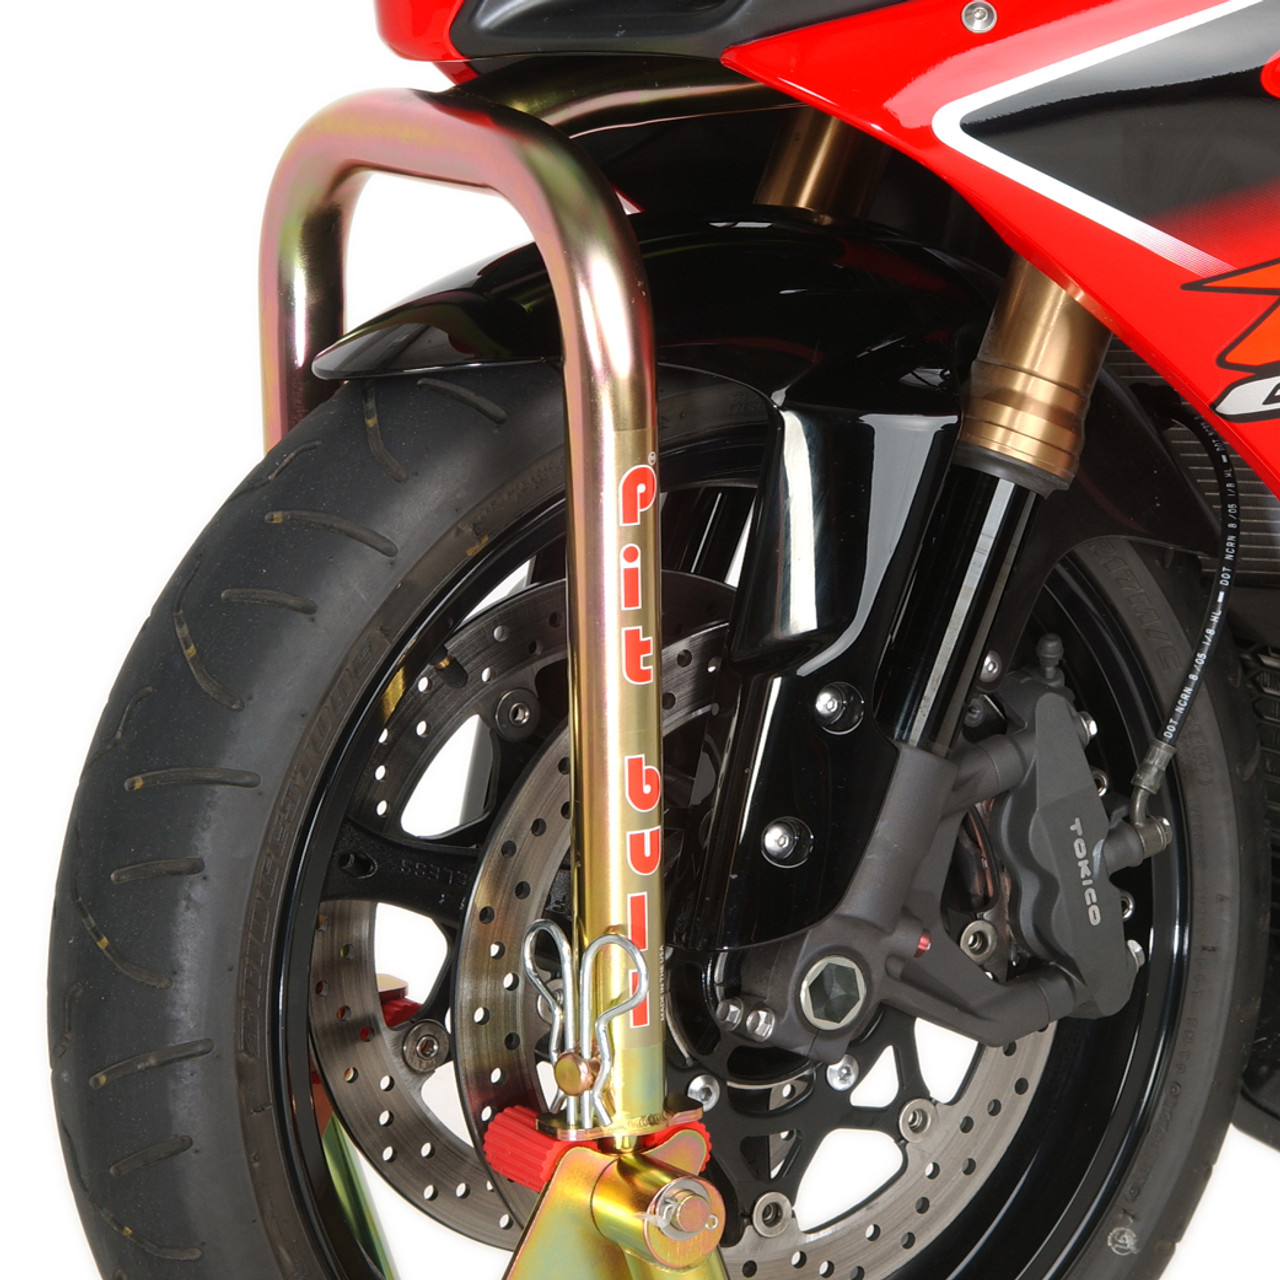 Pit Bull - Motorcycle Stands, Motorcycle Front Stands, Motorcycle